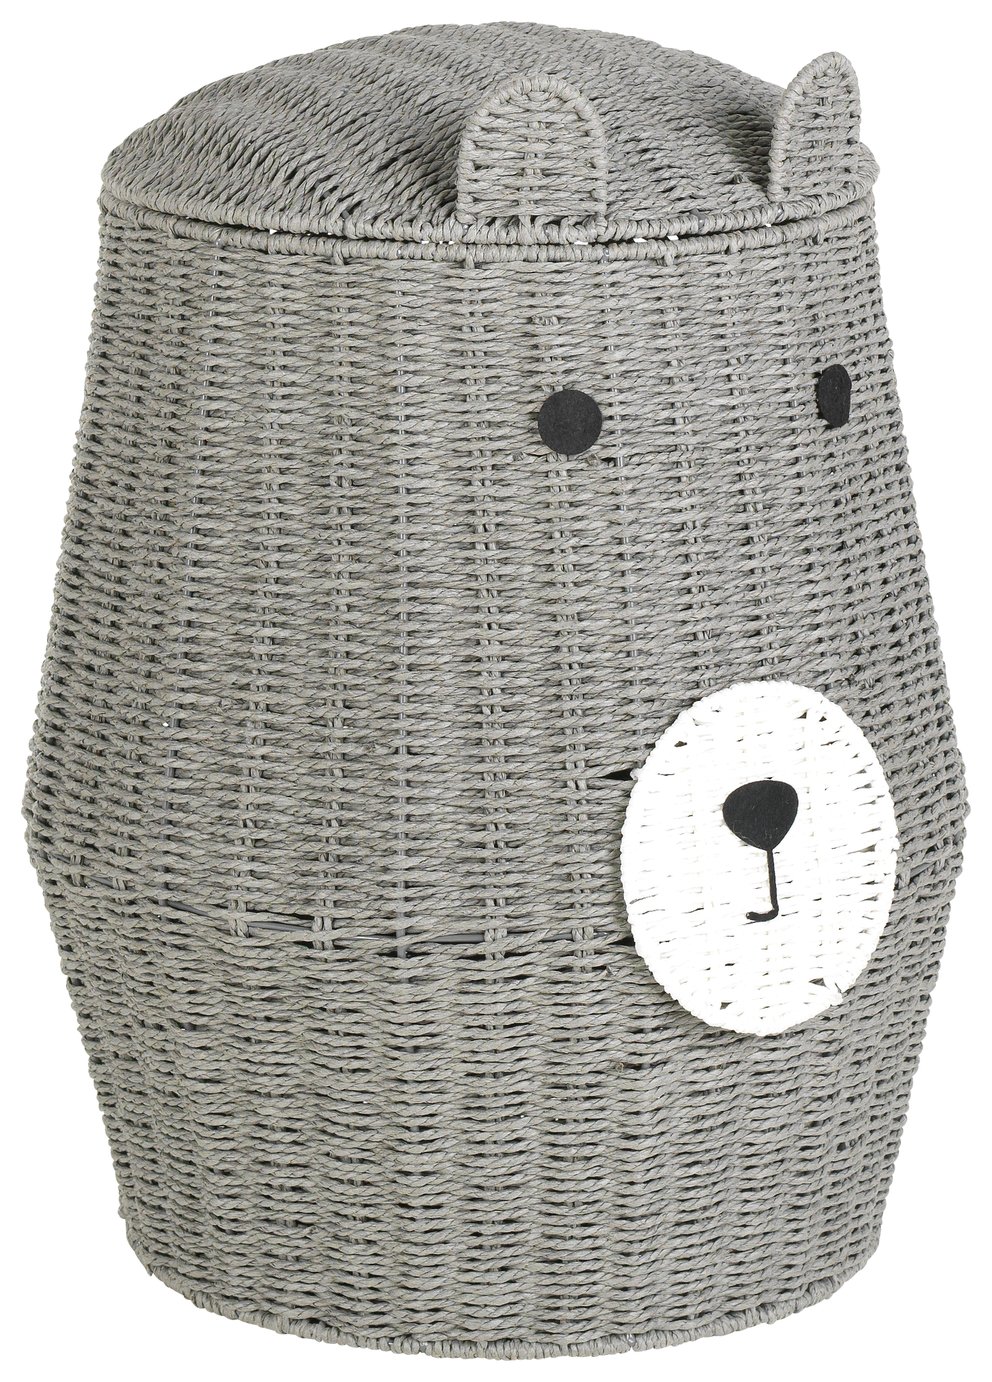 Argos Home Bear Kids Laundry Basket with Lid - Grey